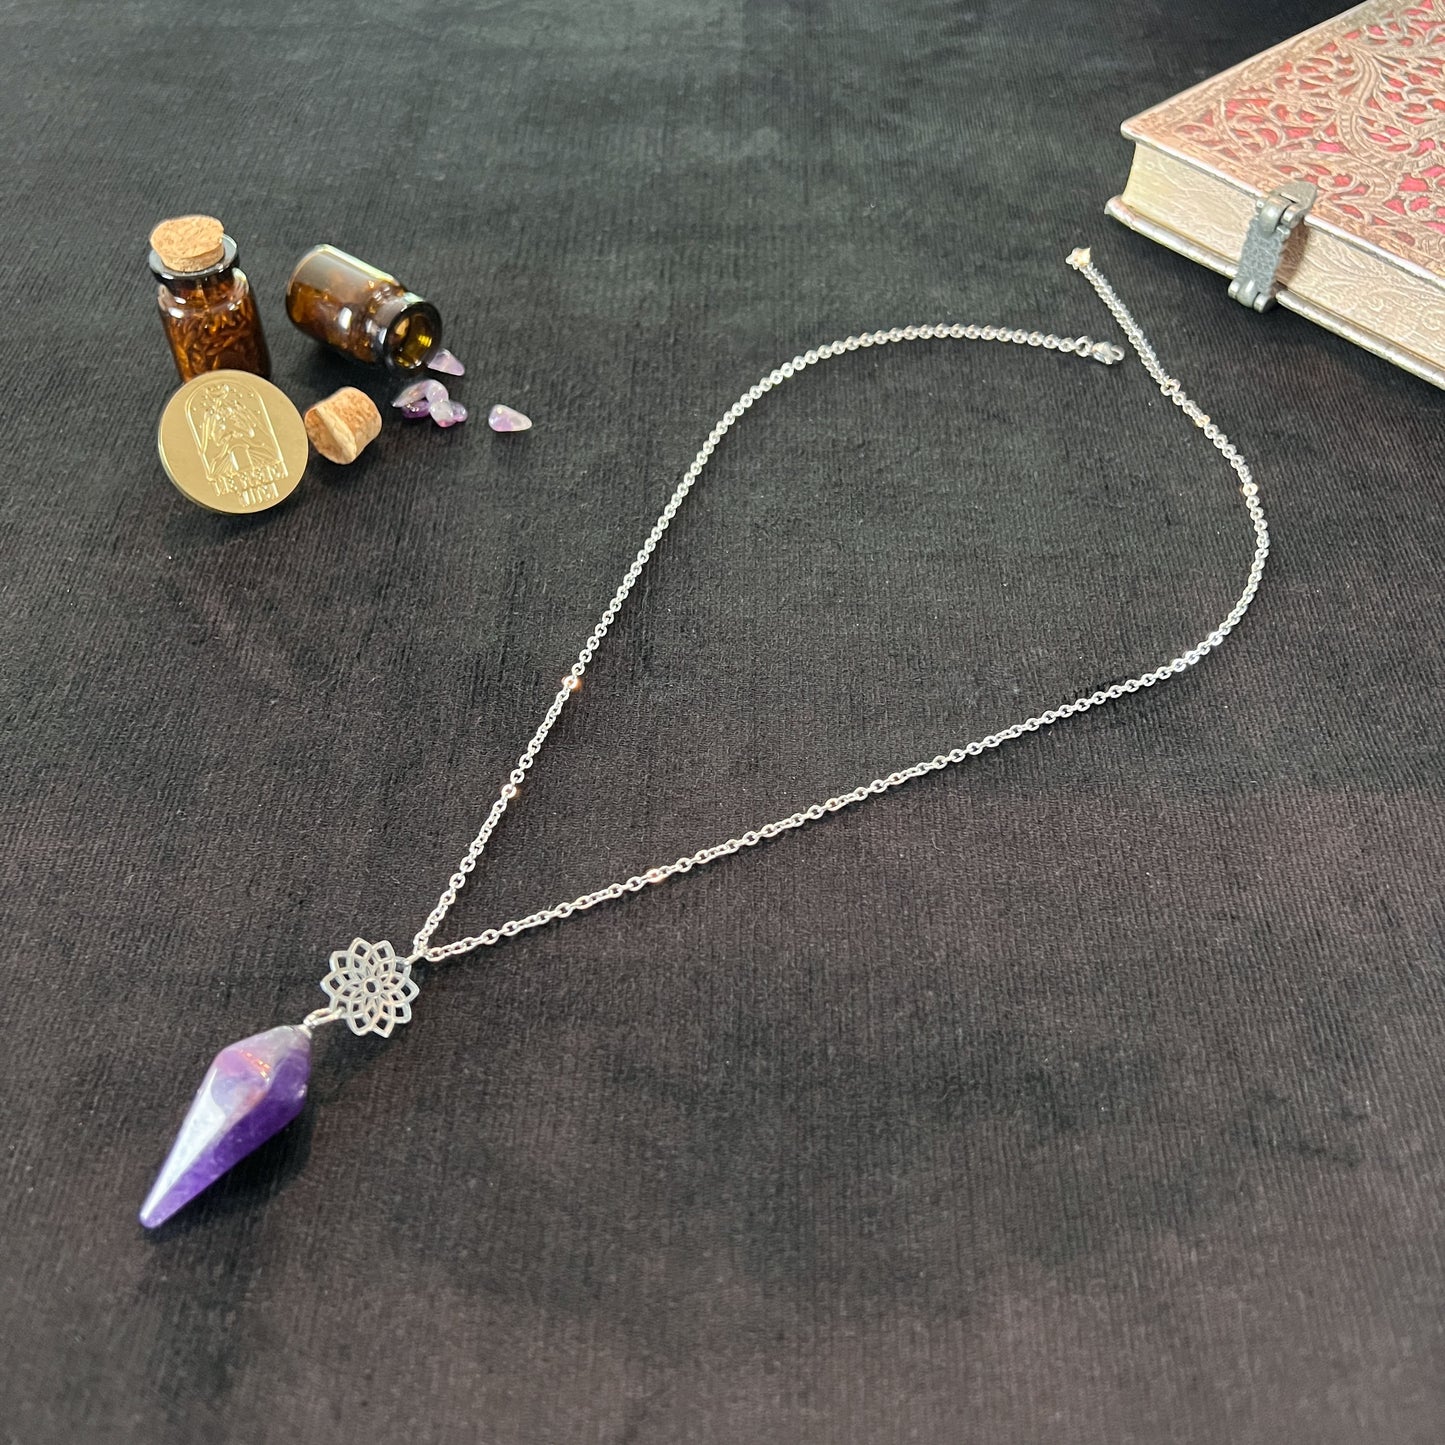 Amethyst and sacred geometry mandala pendulum necklace, stainless steel Baguette Magick